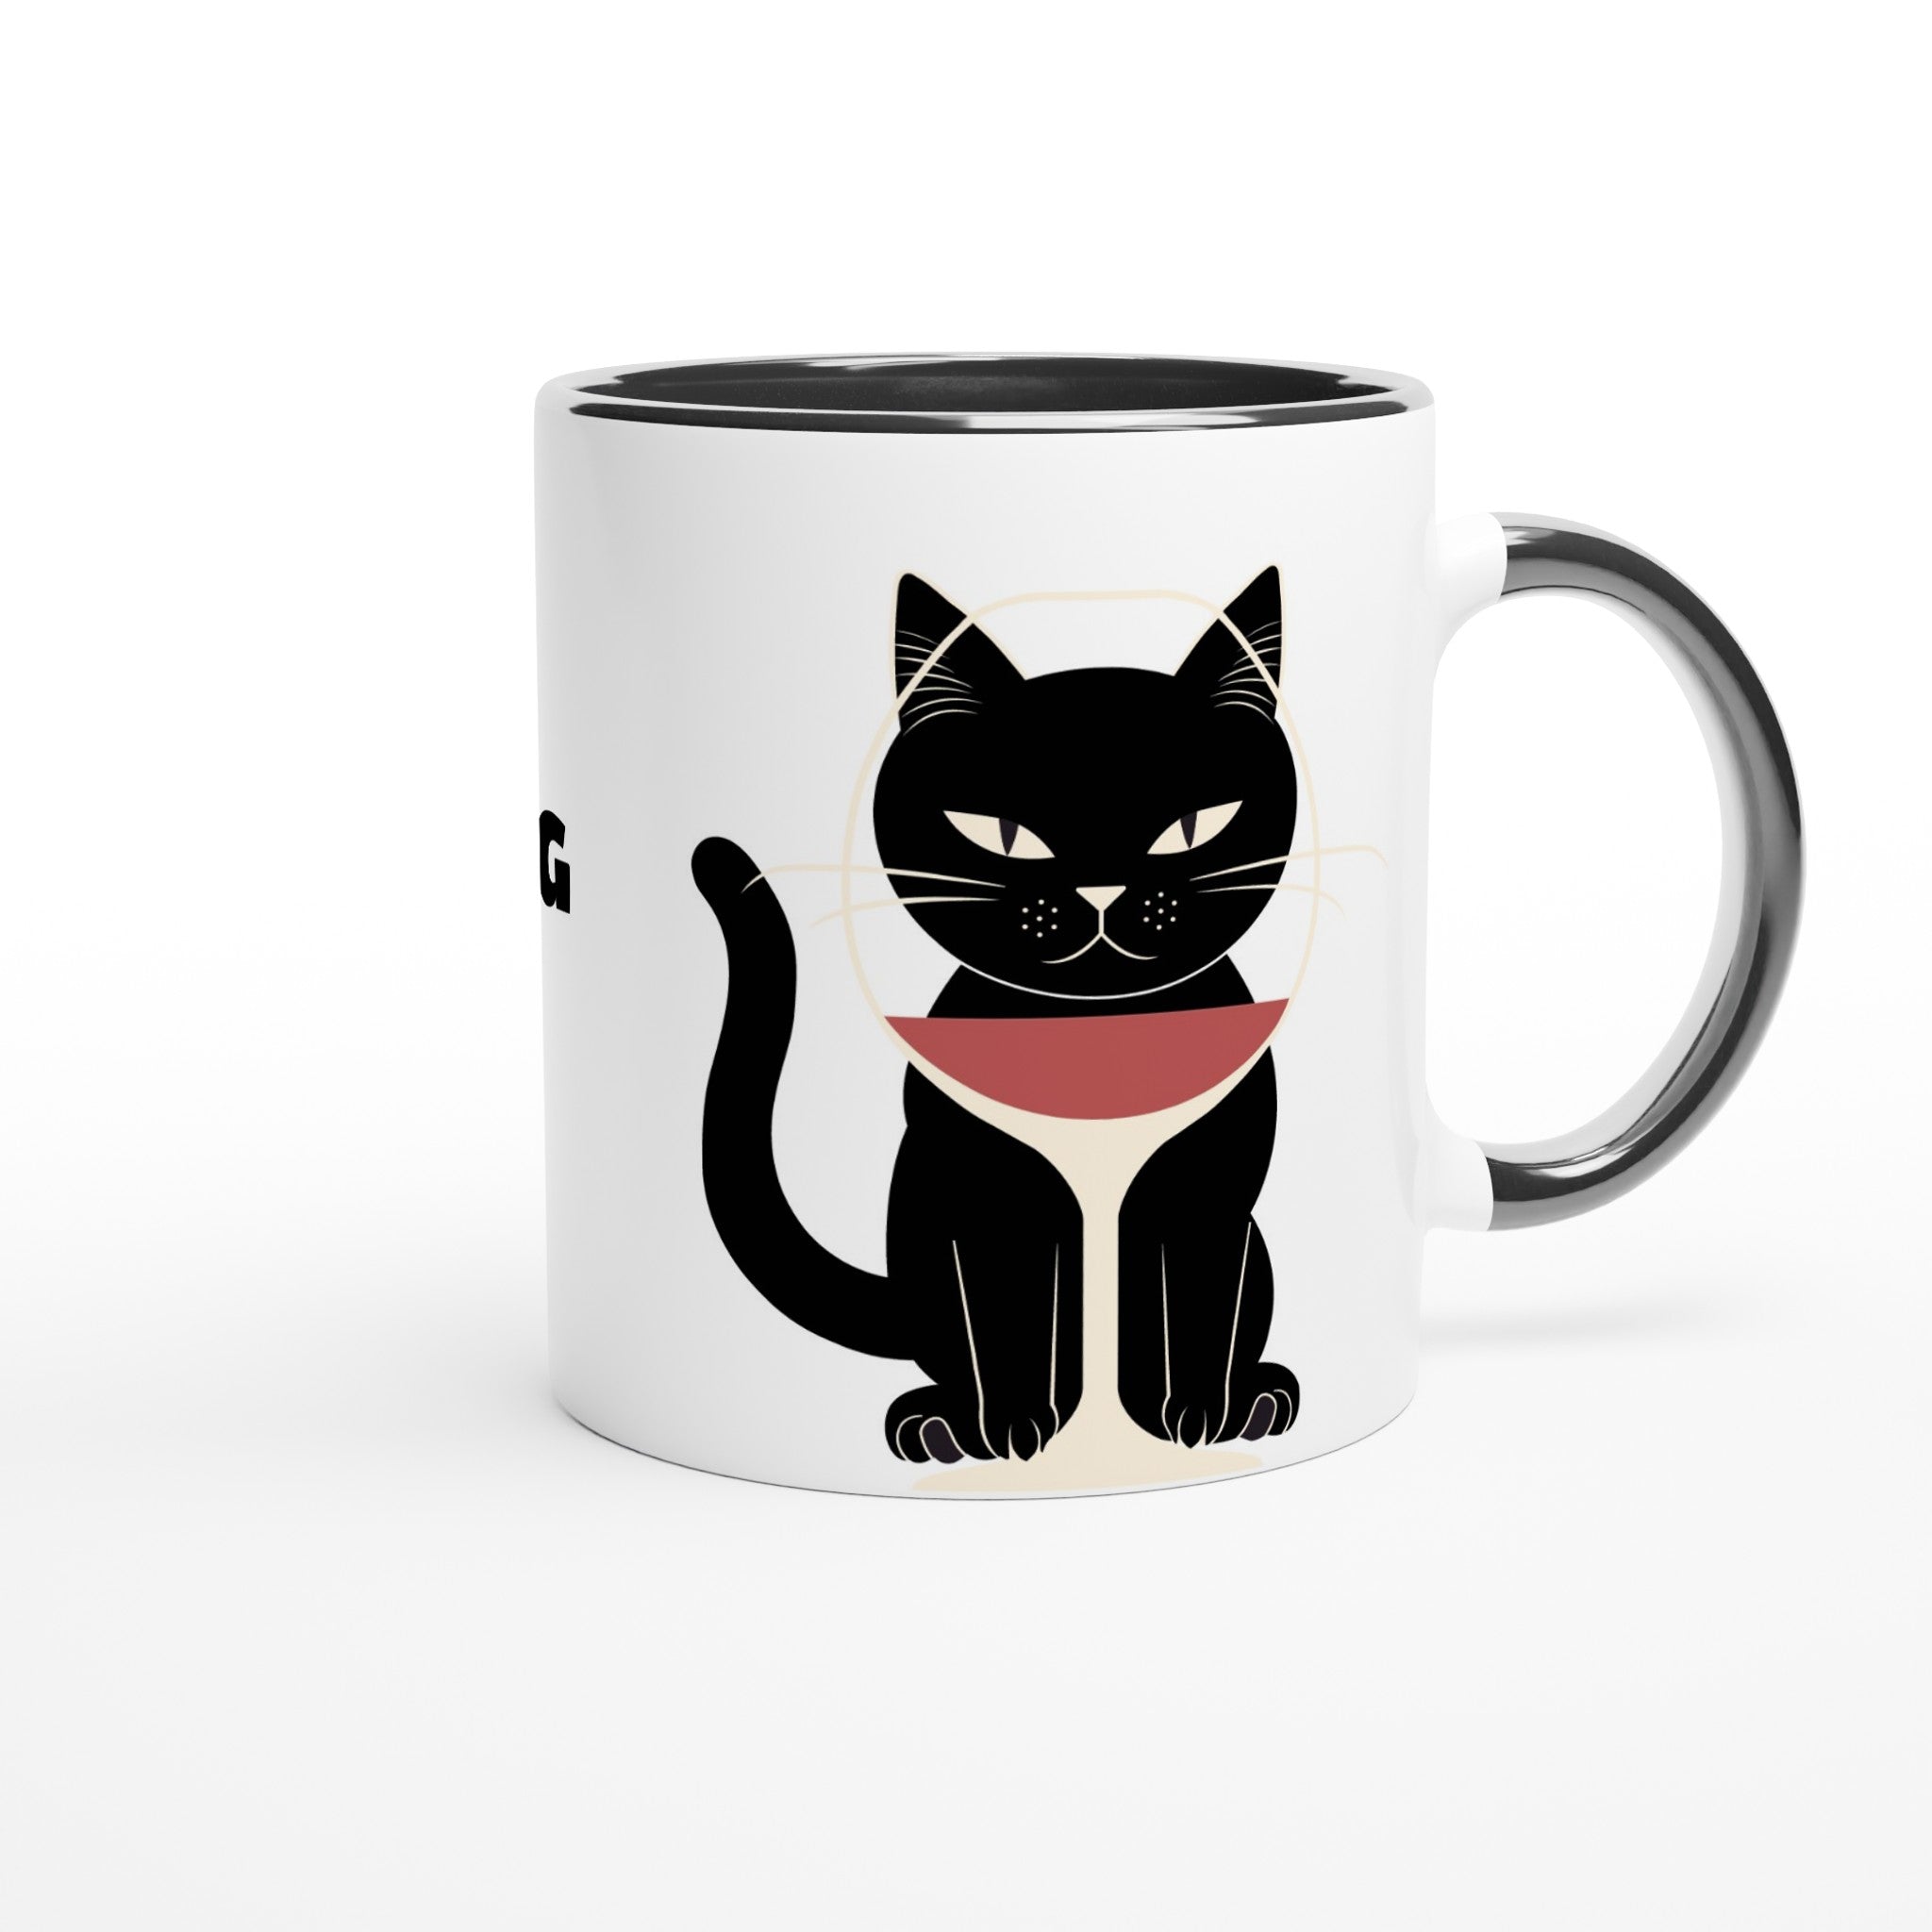 Cat is watching you through glass with wine - high-quality cup with interior coloring